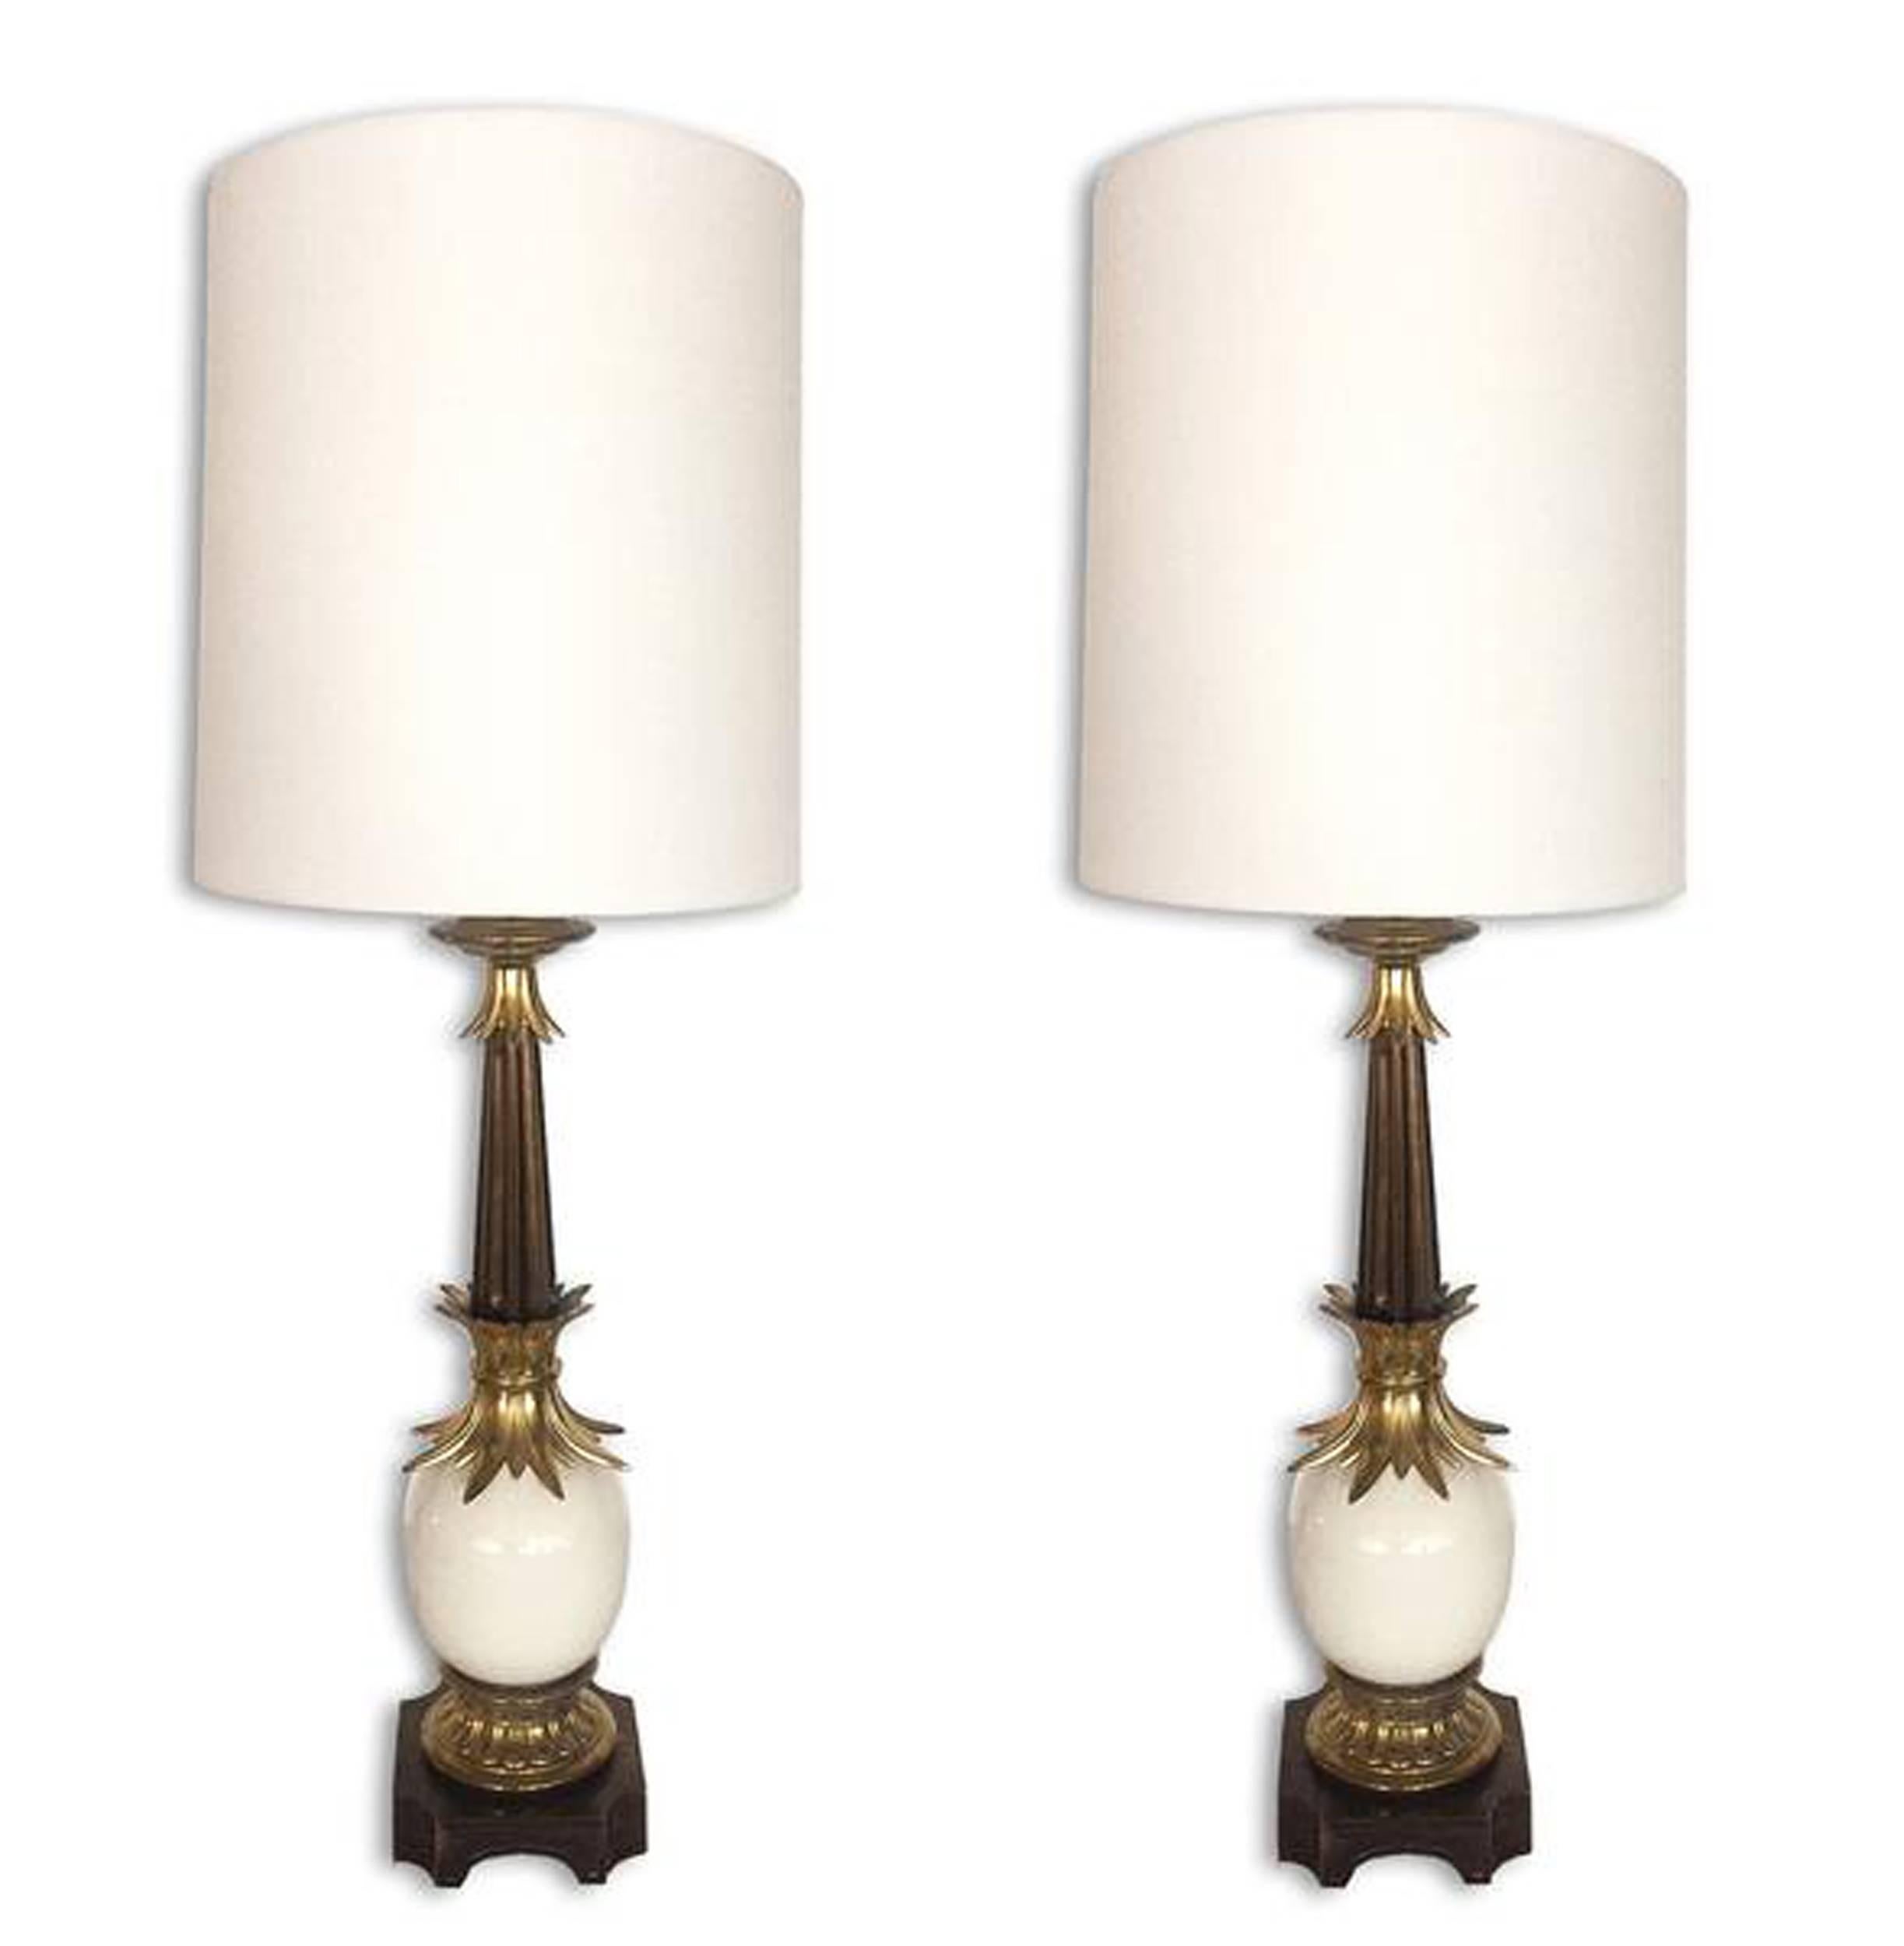 Mid-20th Century Luxe Pair of Hollywood Regency Ostrich Egg Lamps by Stiffel